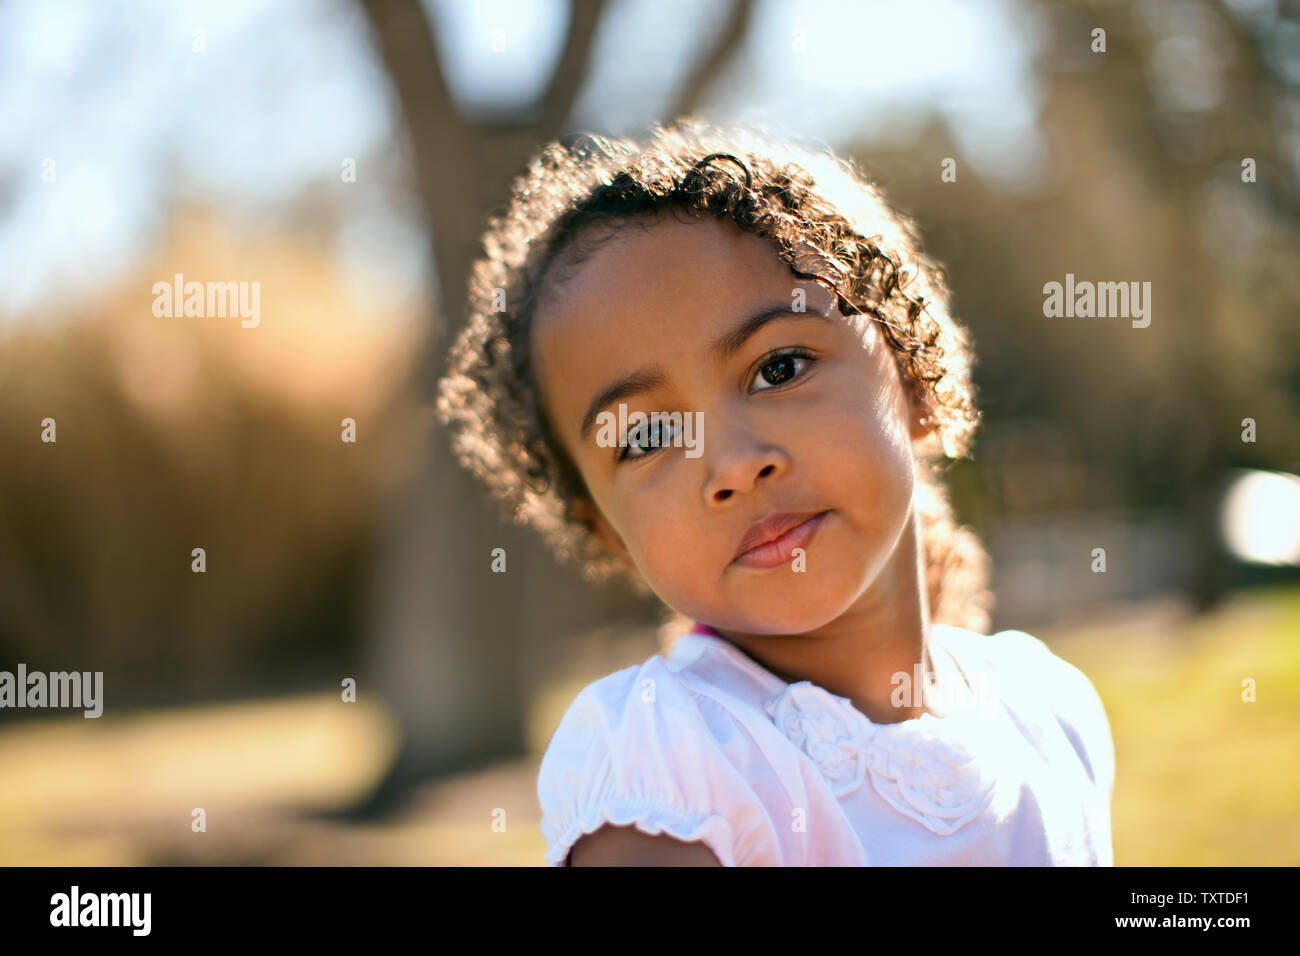 Portrait of young girl outside. Stock Photo